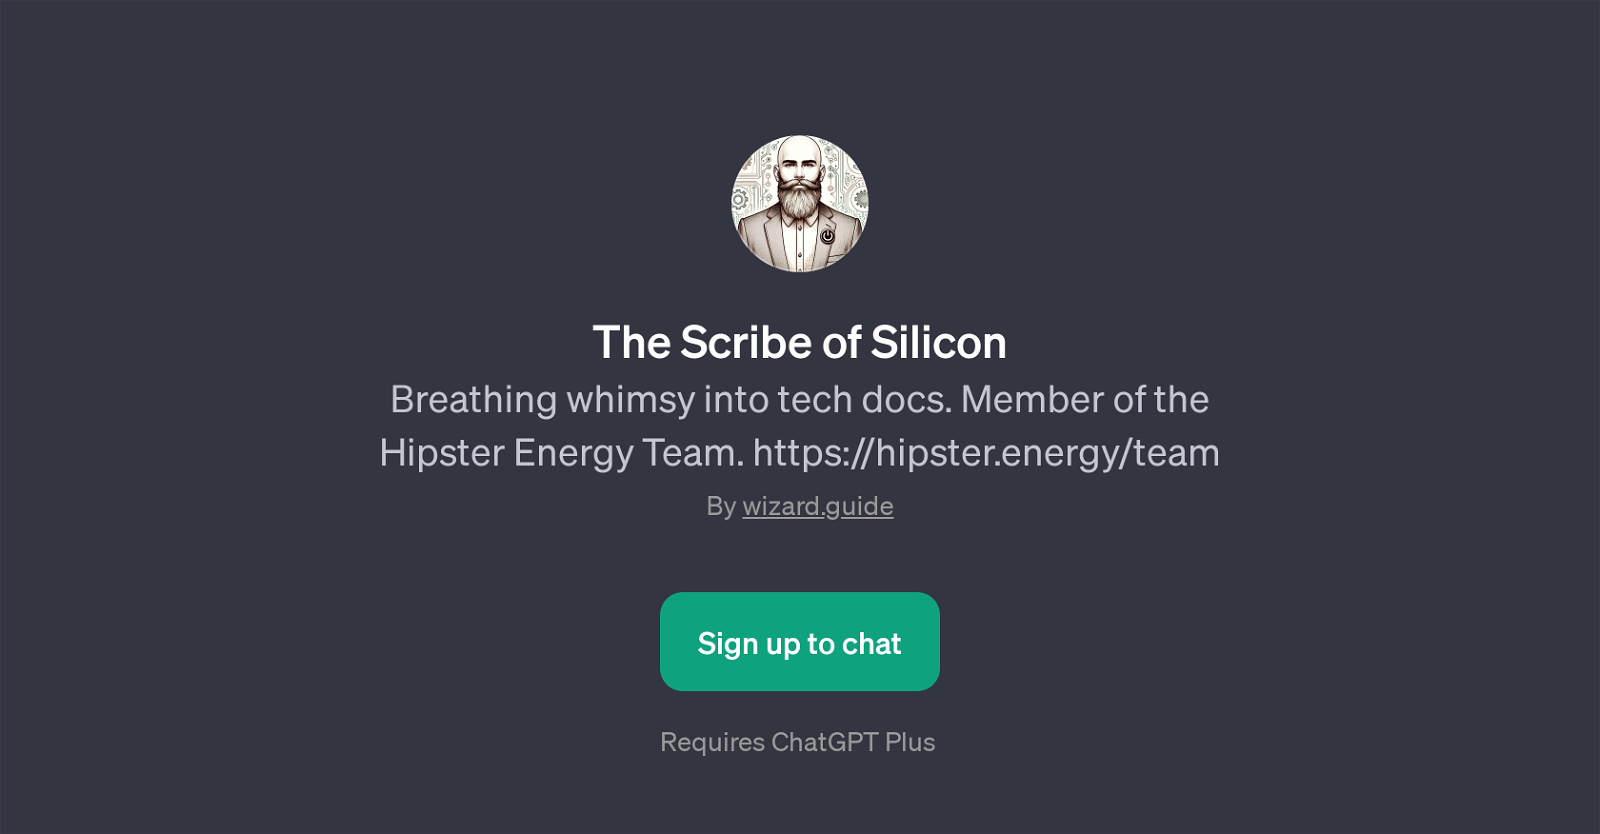 The Scribe of Silicon website